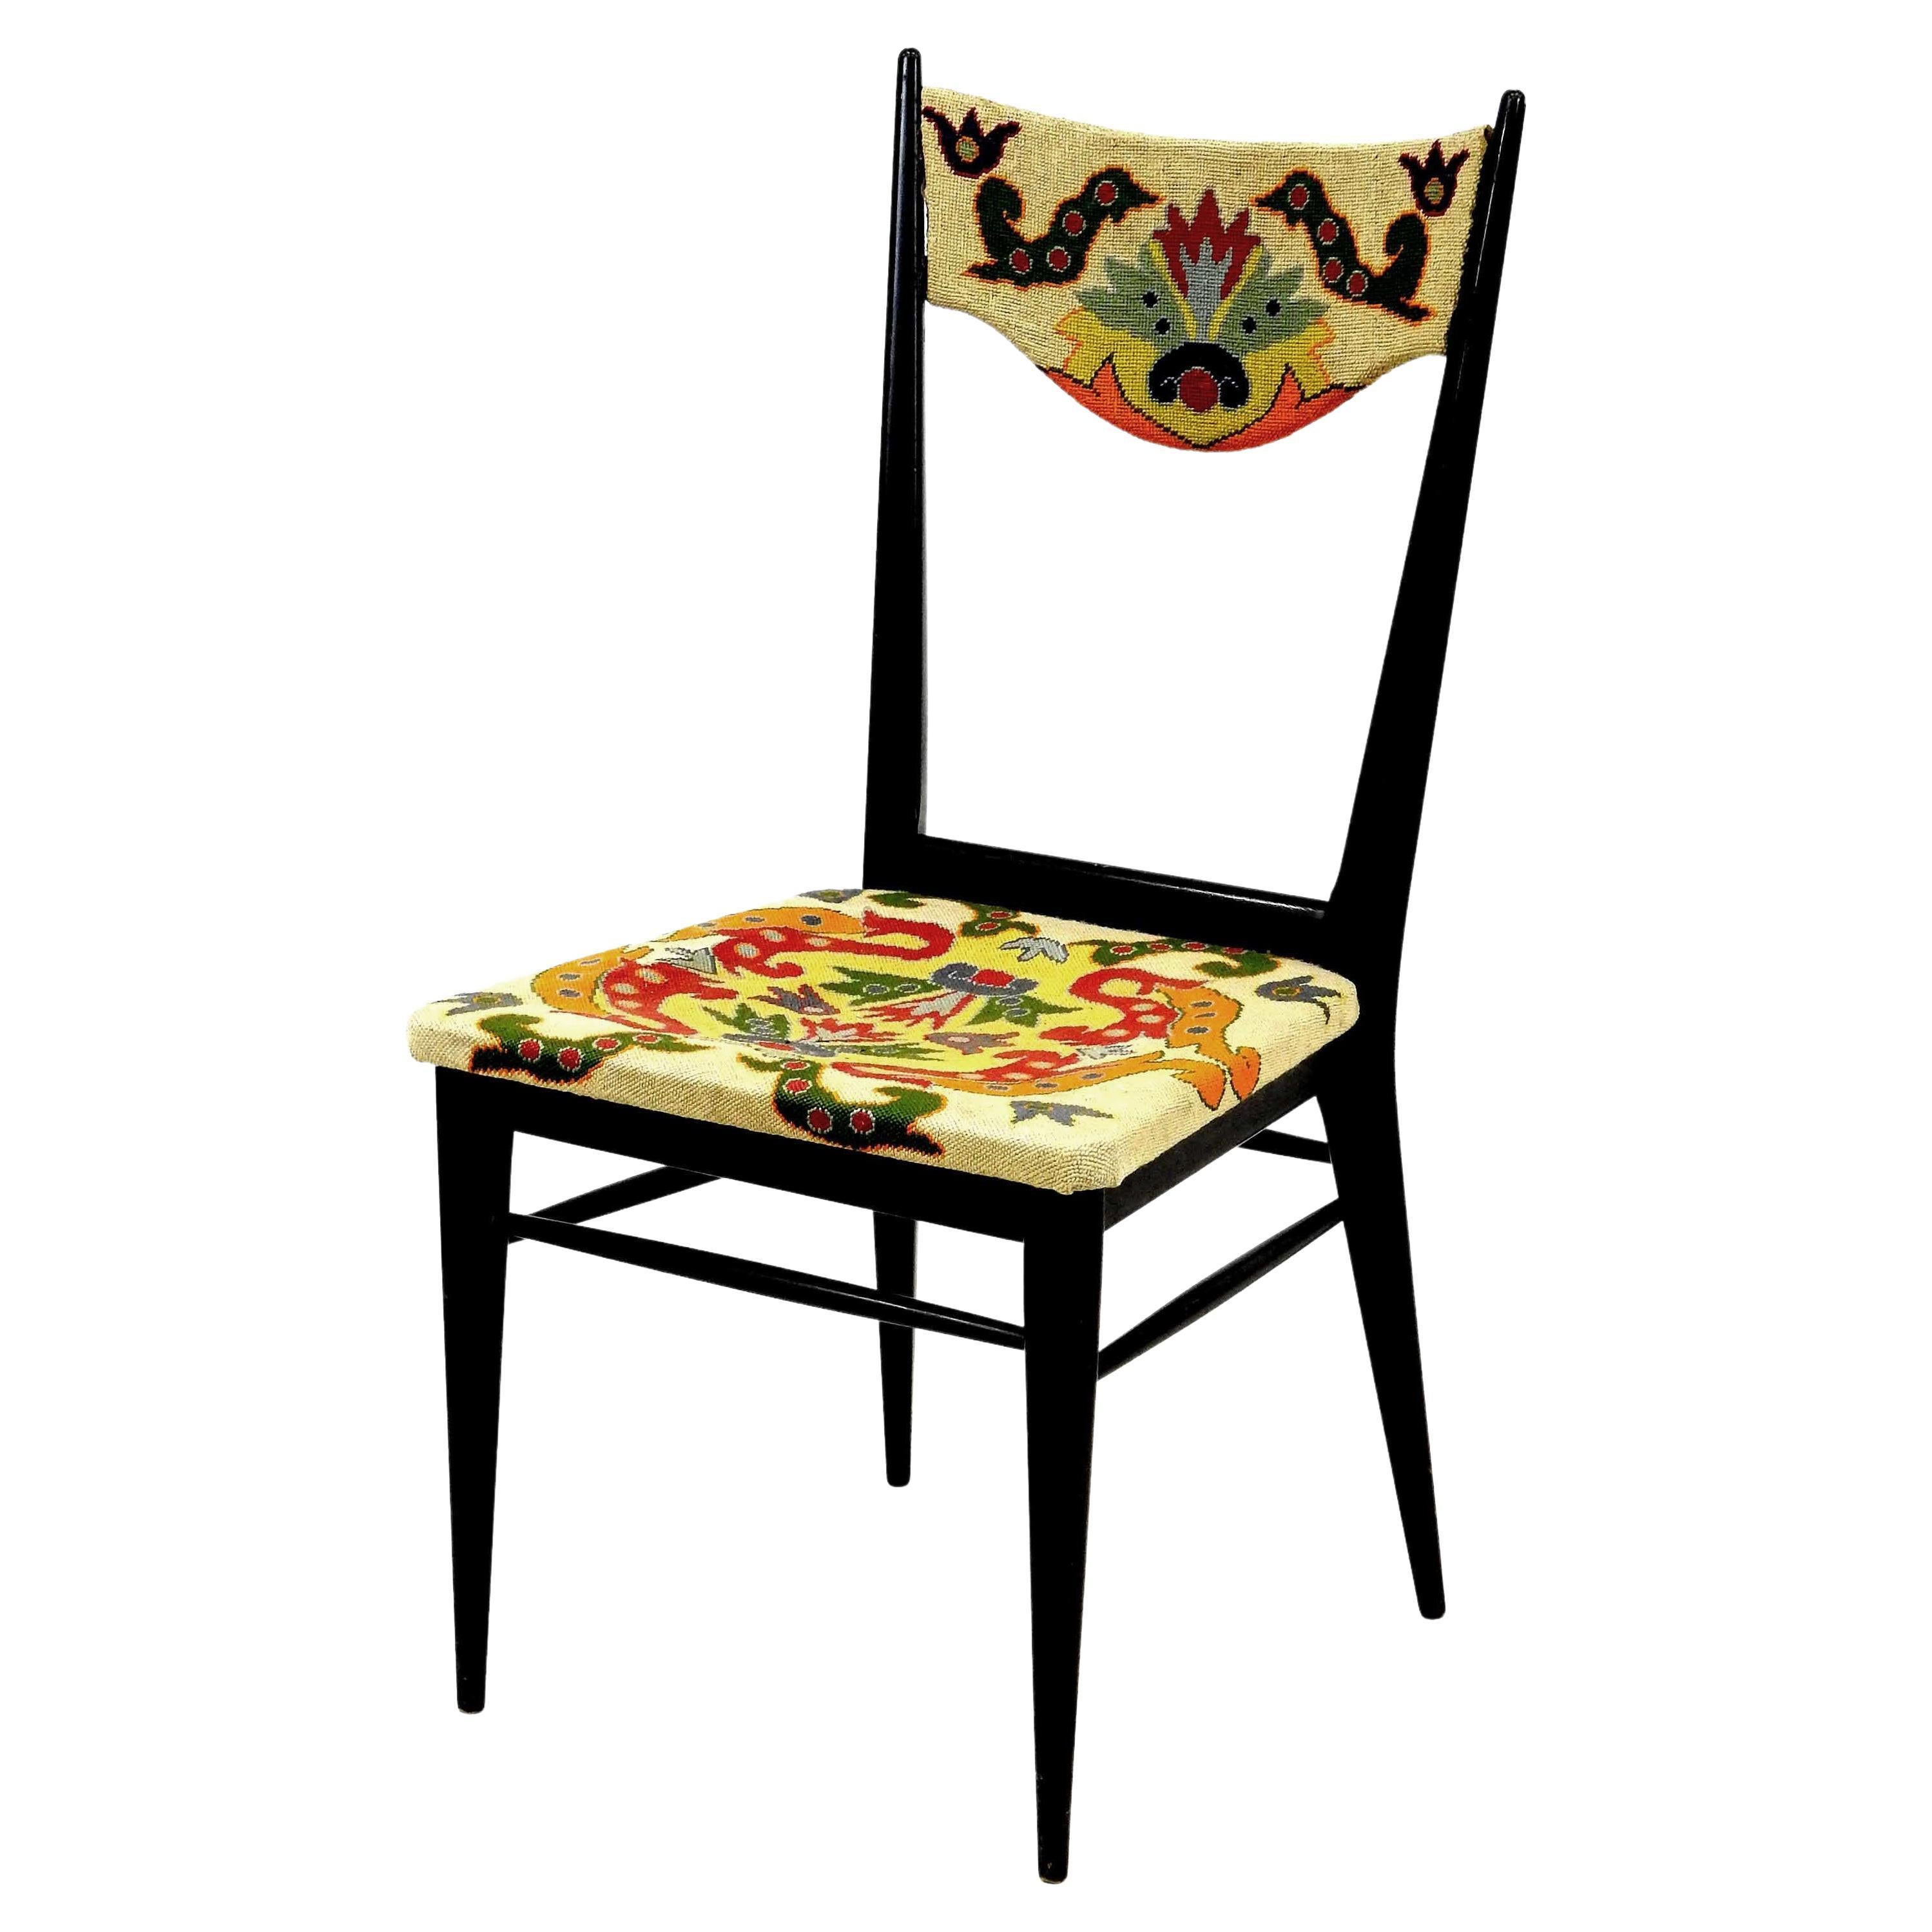 Chair with Ebonized Wooden Structure, Seat and Back Covered with Tapestry